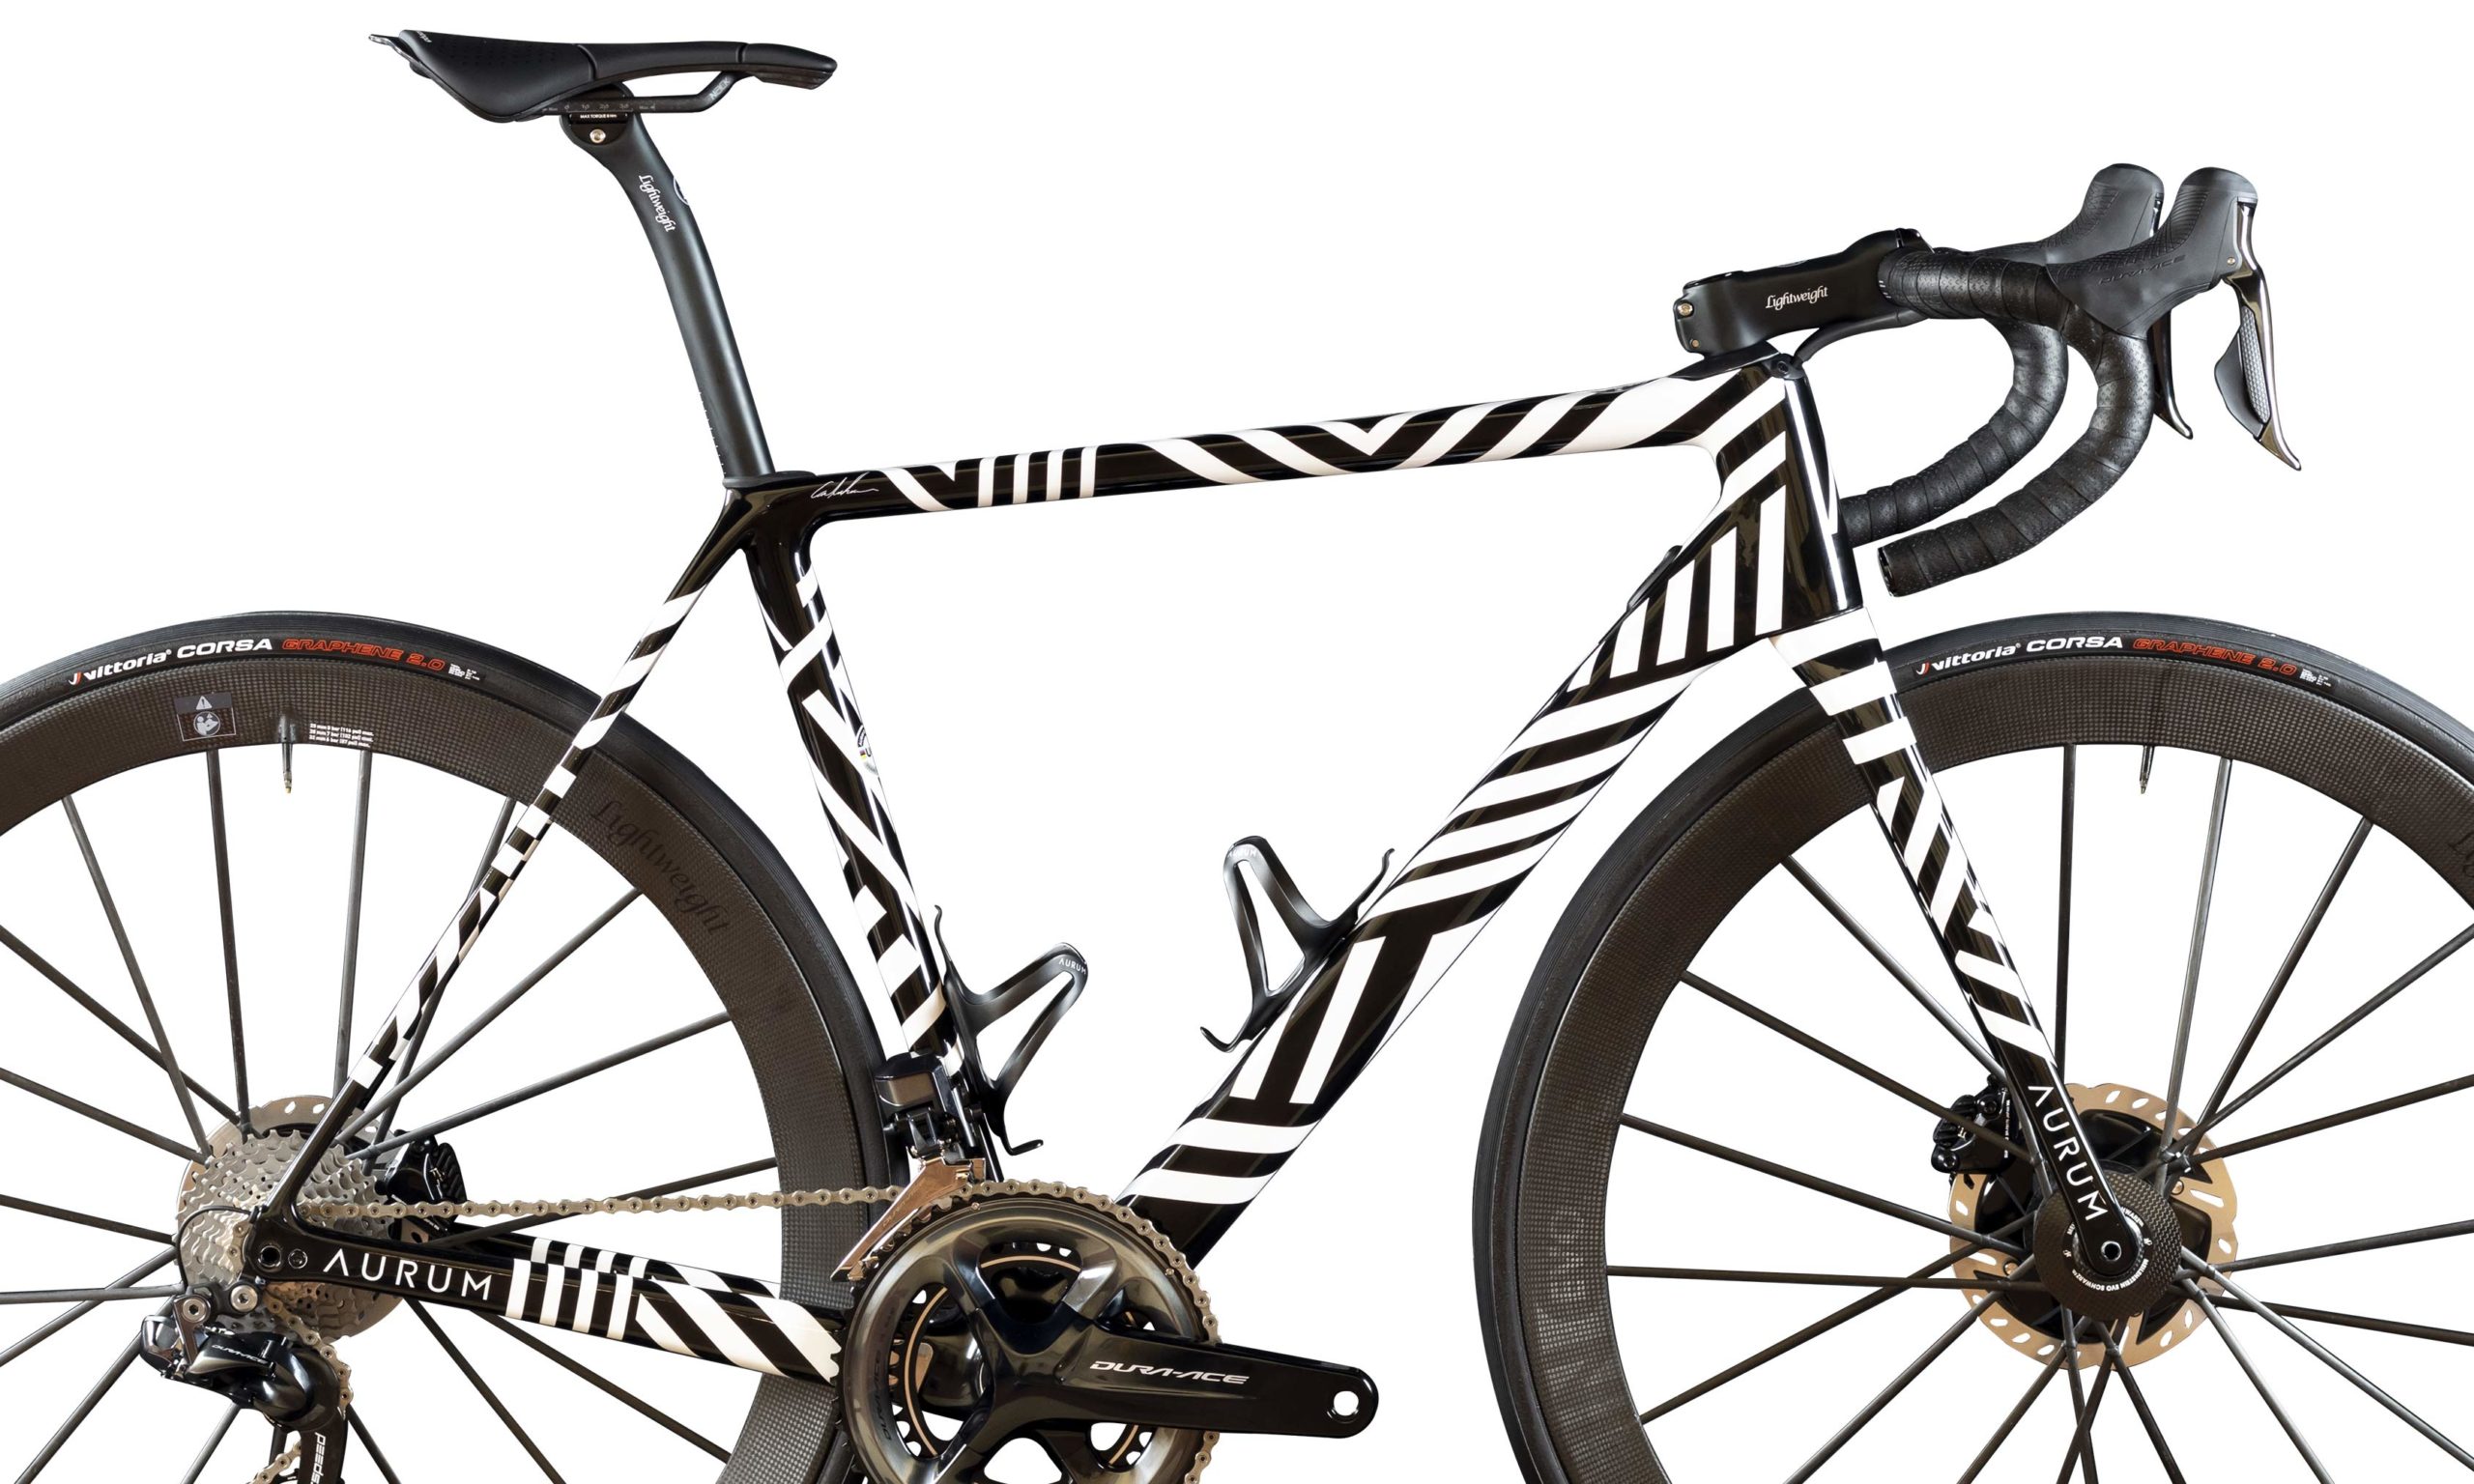 Aurum Zevra ultra-limited edition premium lightweight carbon Magma disc brake road bike by Basso & Contador, 1 of 21